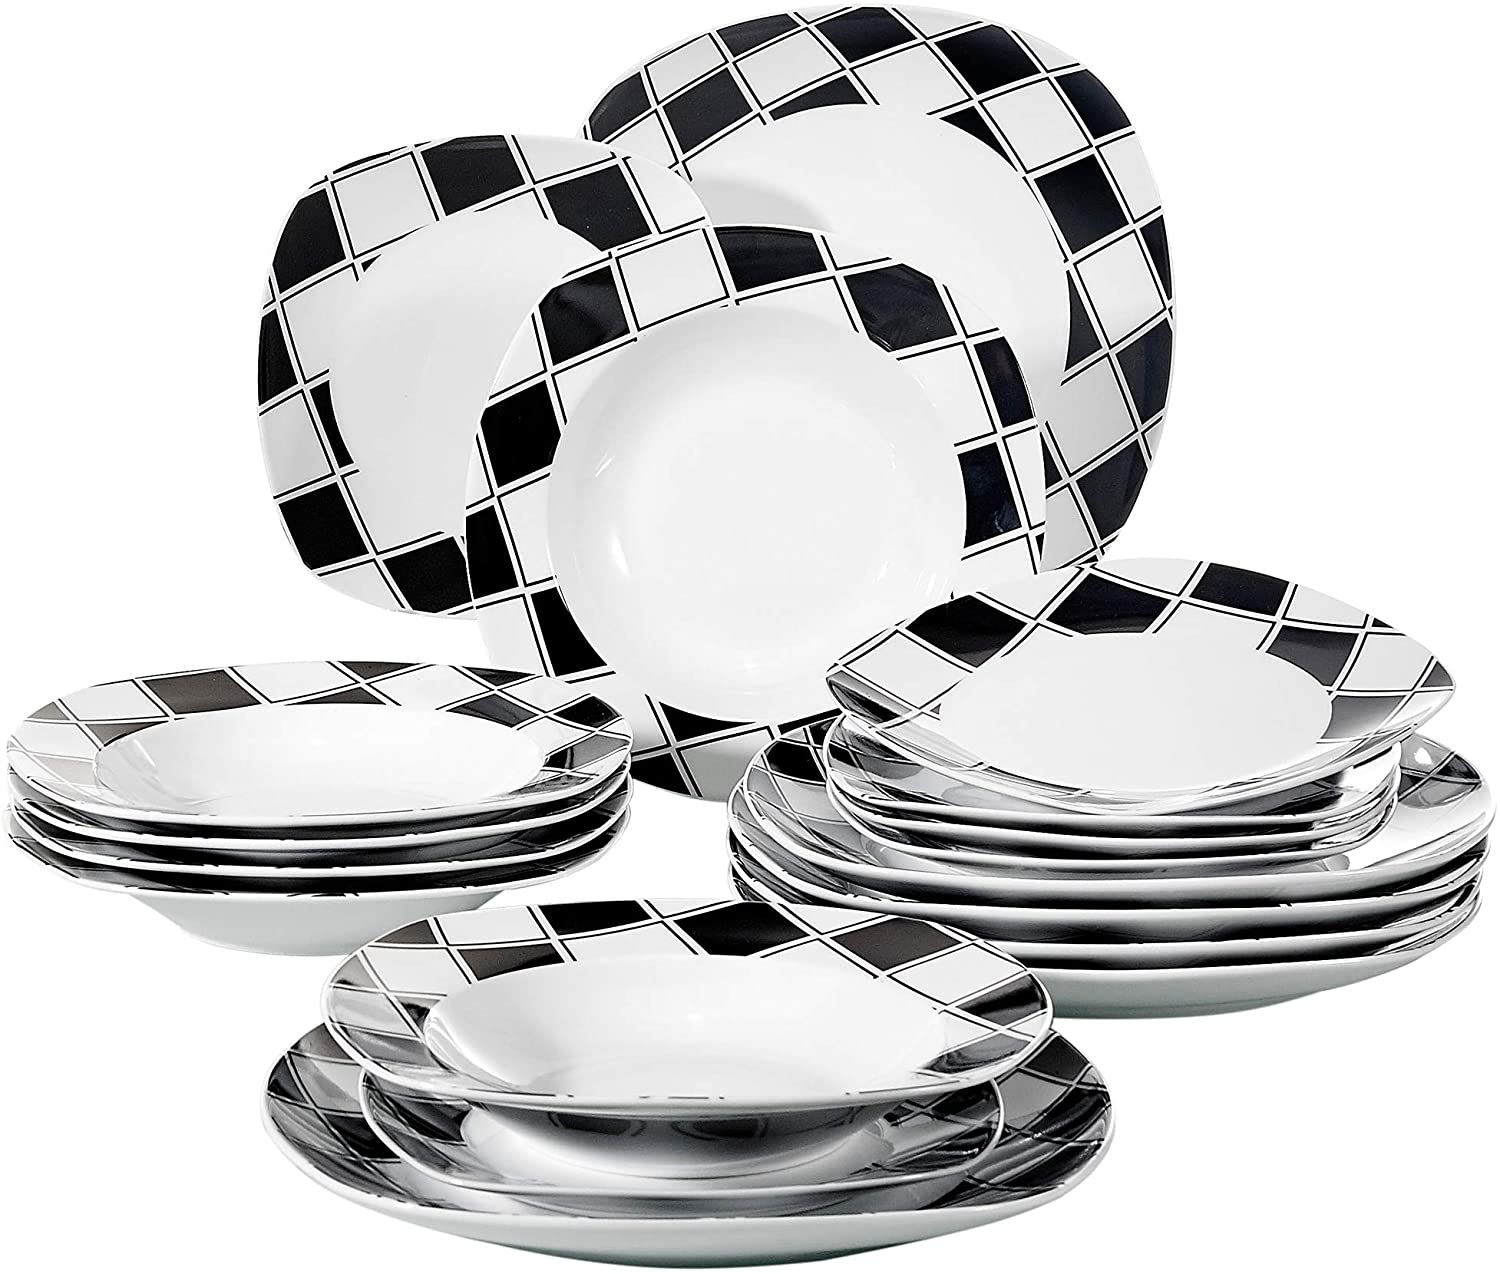 VEWEET Nicole Dinner Set 18 Pieces Porcelain Plate Set for 6 People with 6 Dessert Plates and Flat Plates